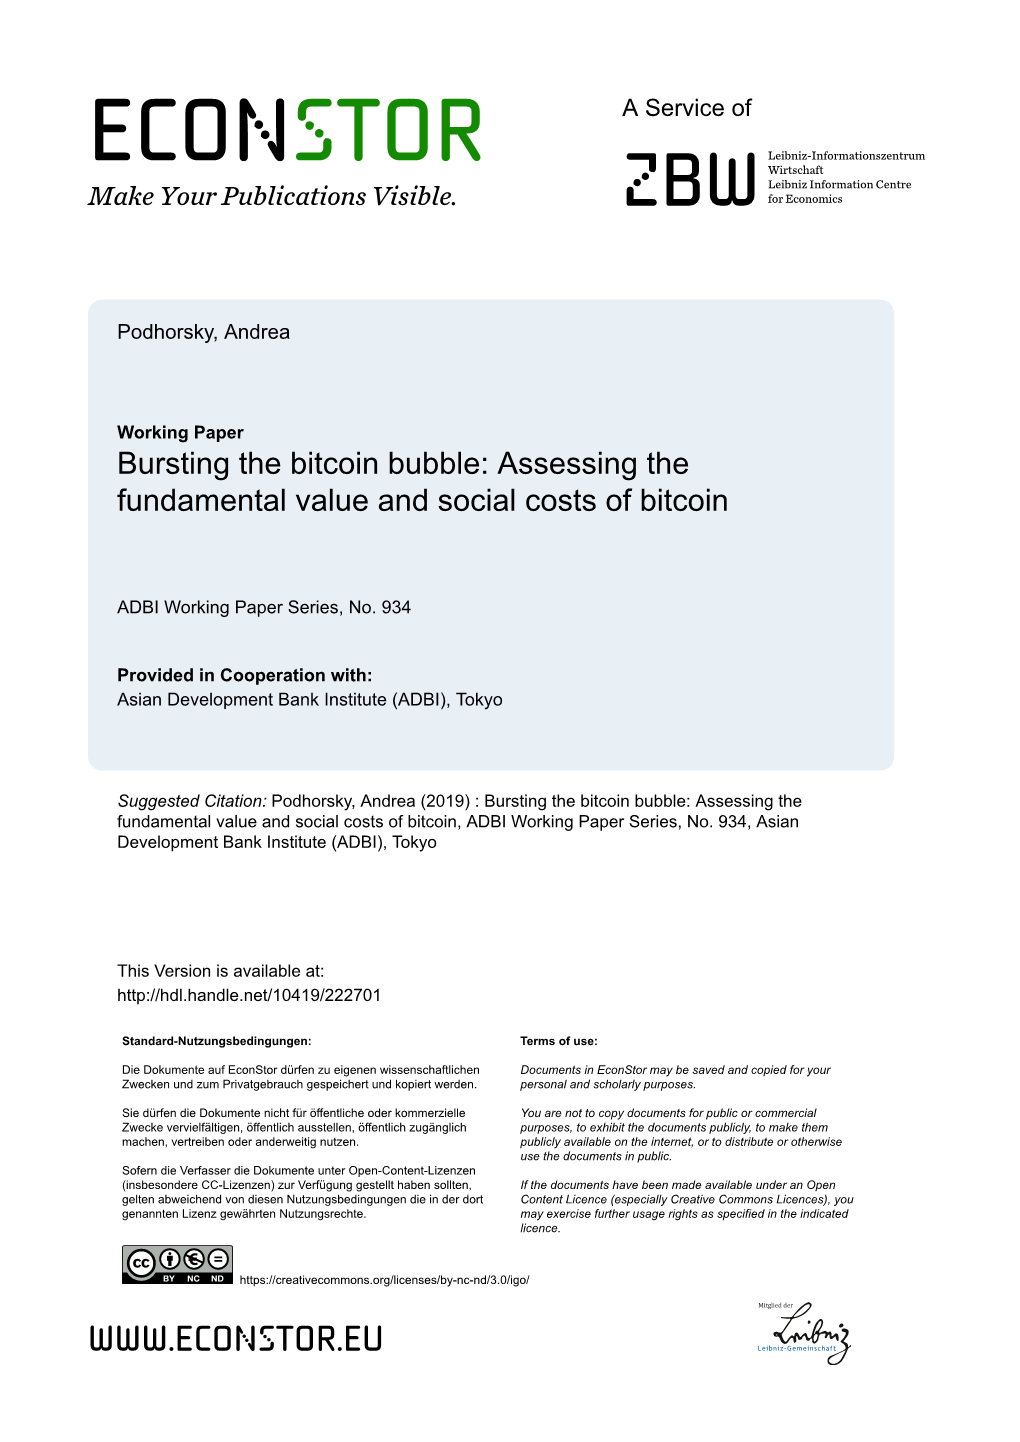 Bursting the Bitcoin Bubble: Assessing the Fundamental Value and Social Costs of Bitcoin